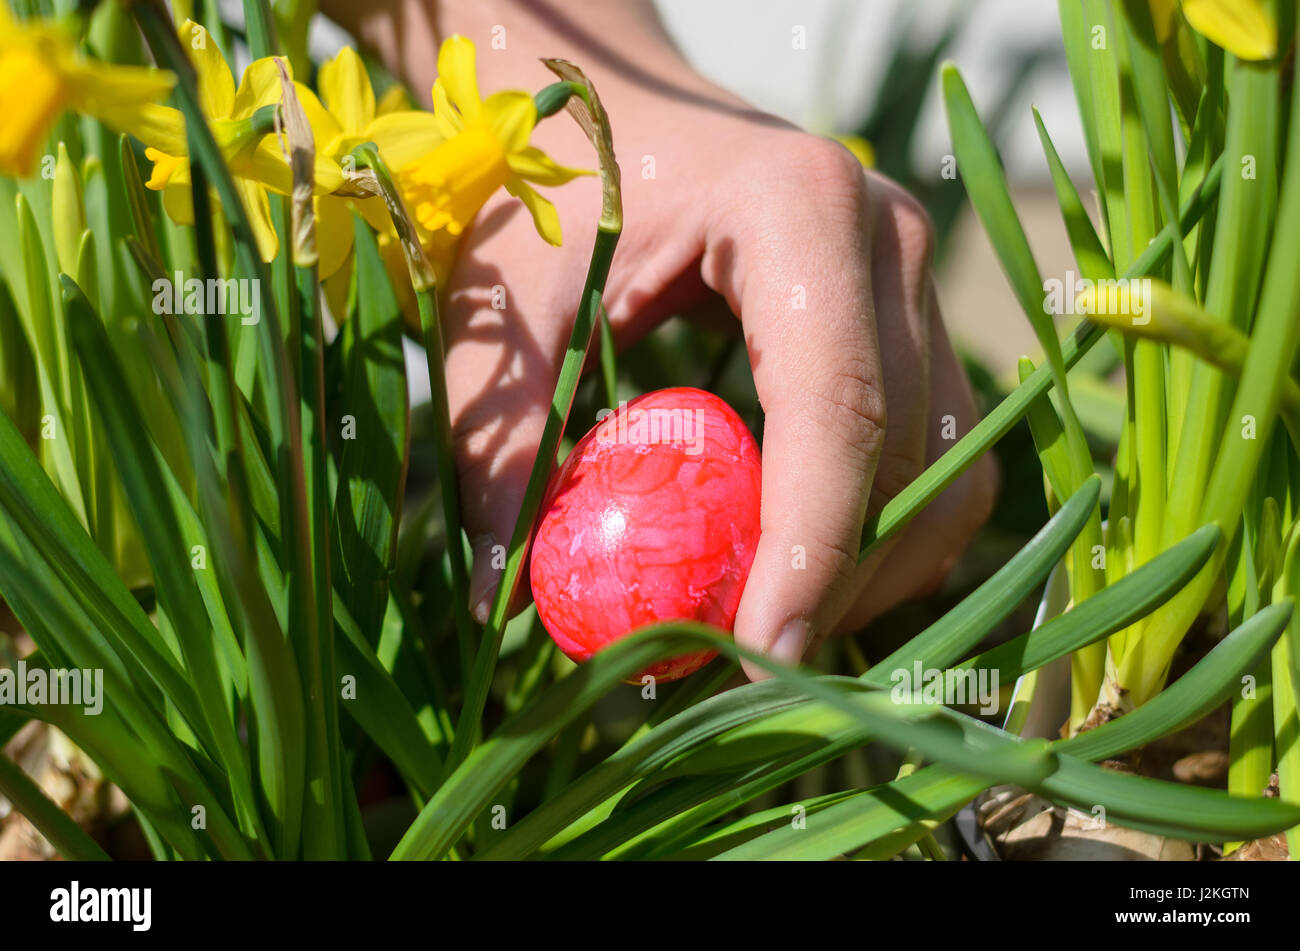 Young man hiding a colorful red Easter egg in a clump of bright ...